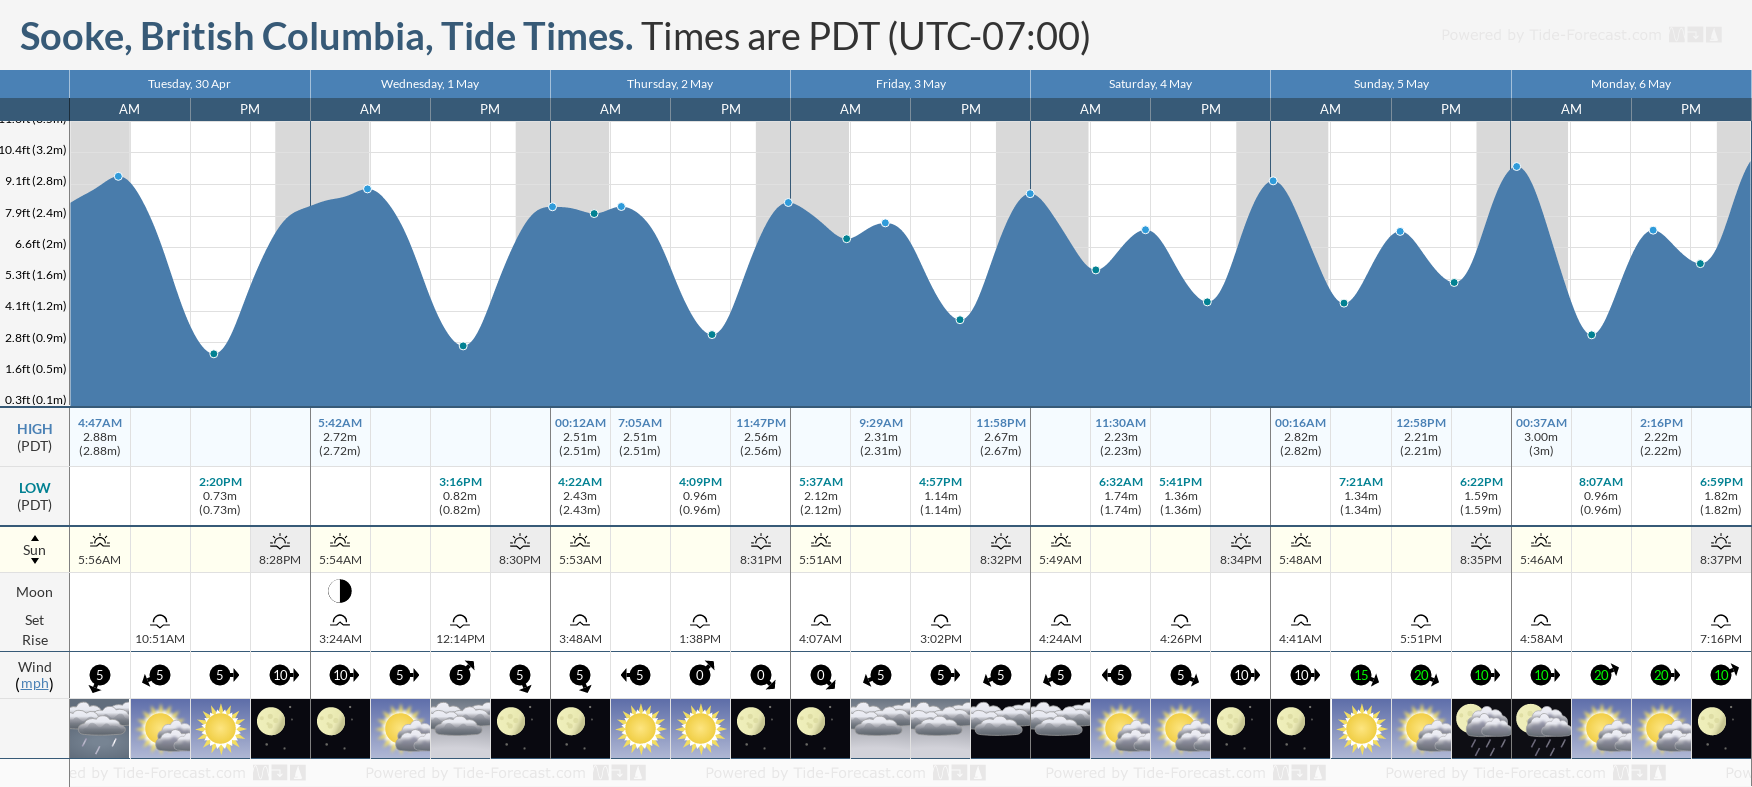 Sooke, British Columbia Tide Chart including high and low tide tide times for the next 7 days